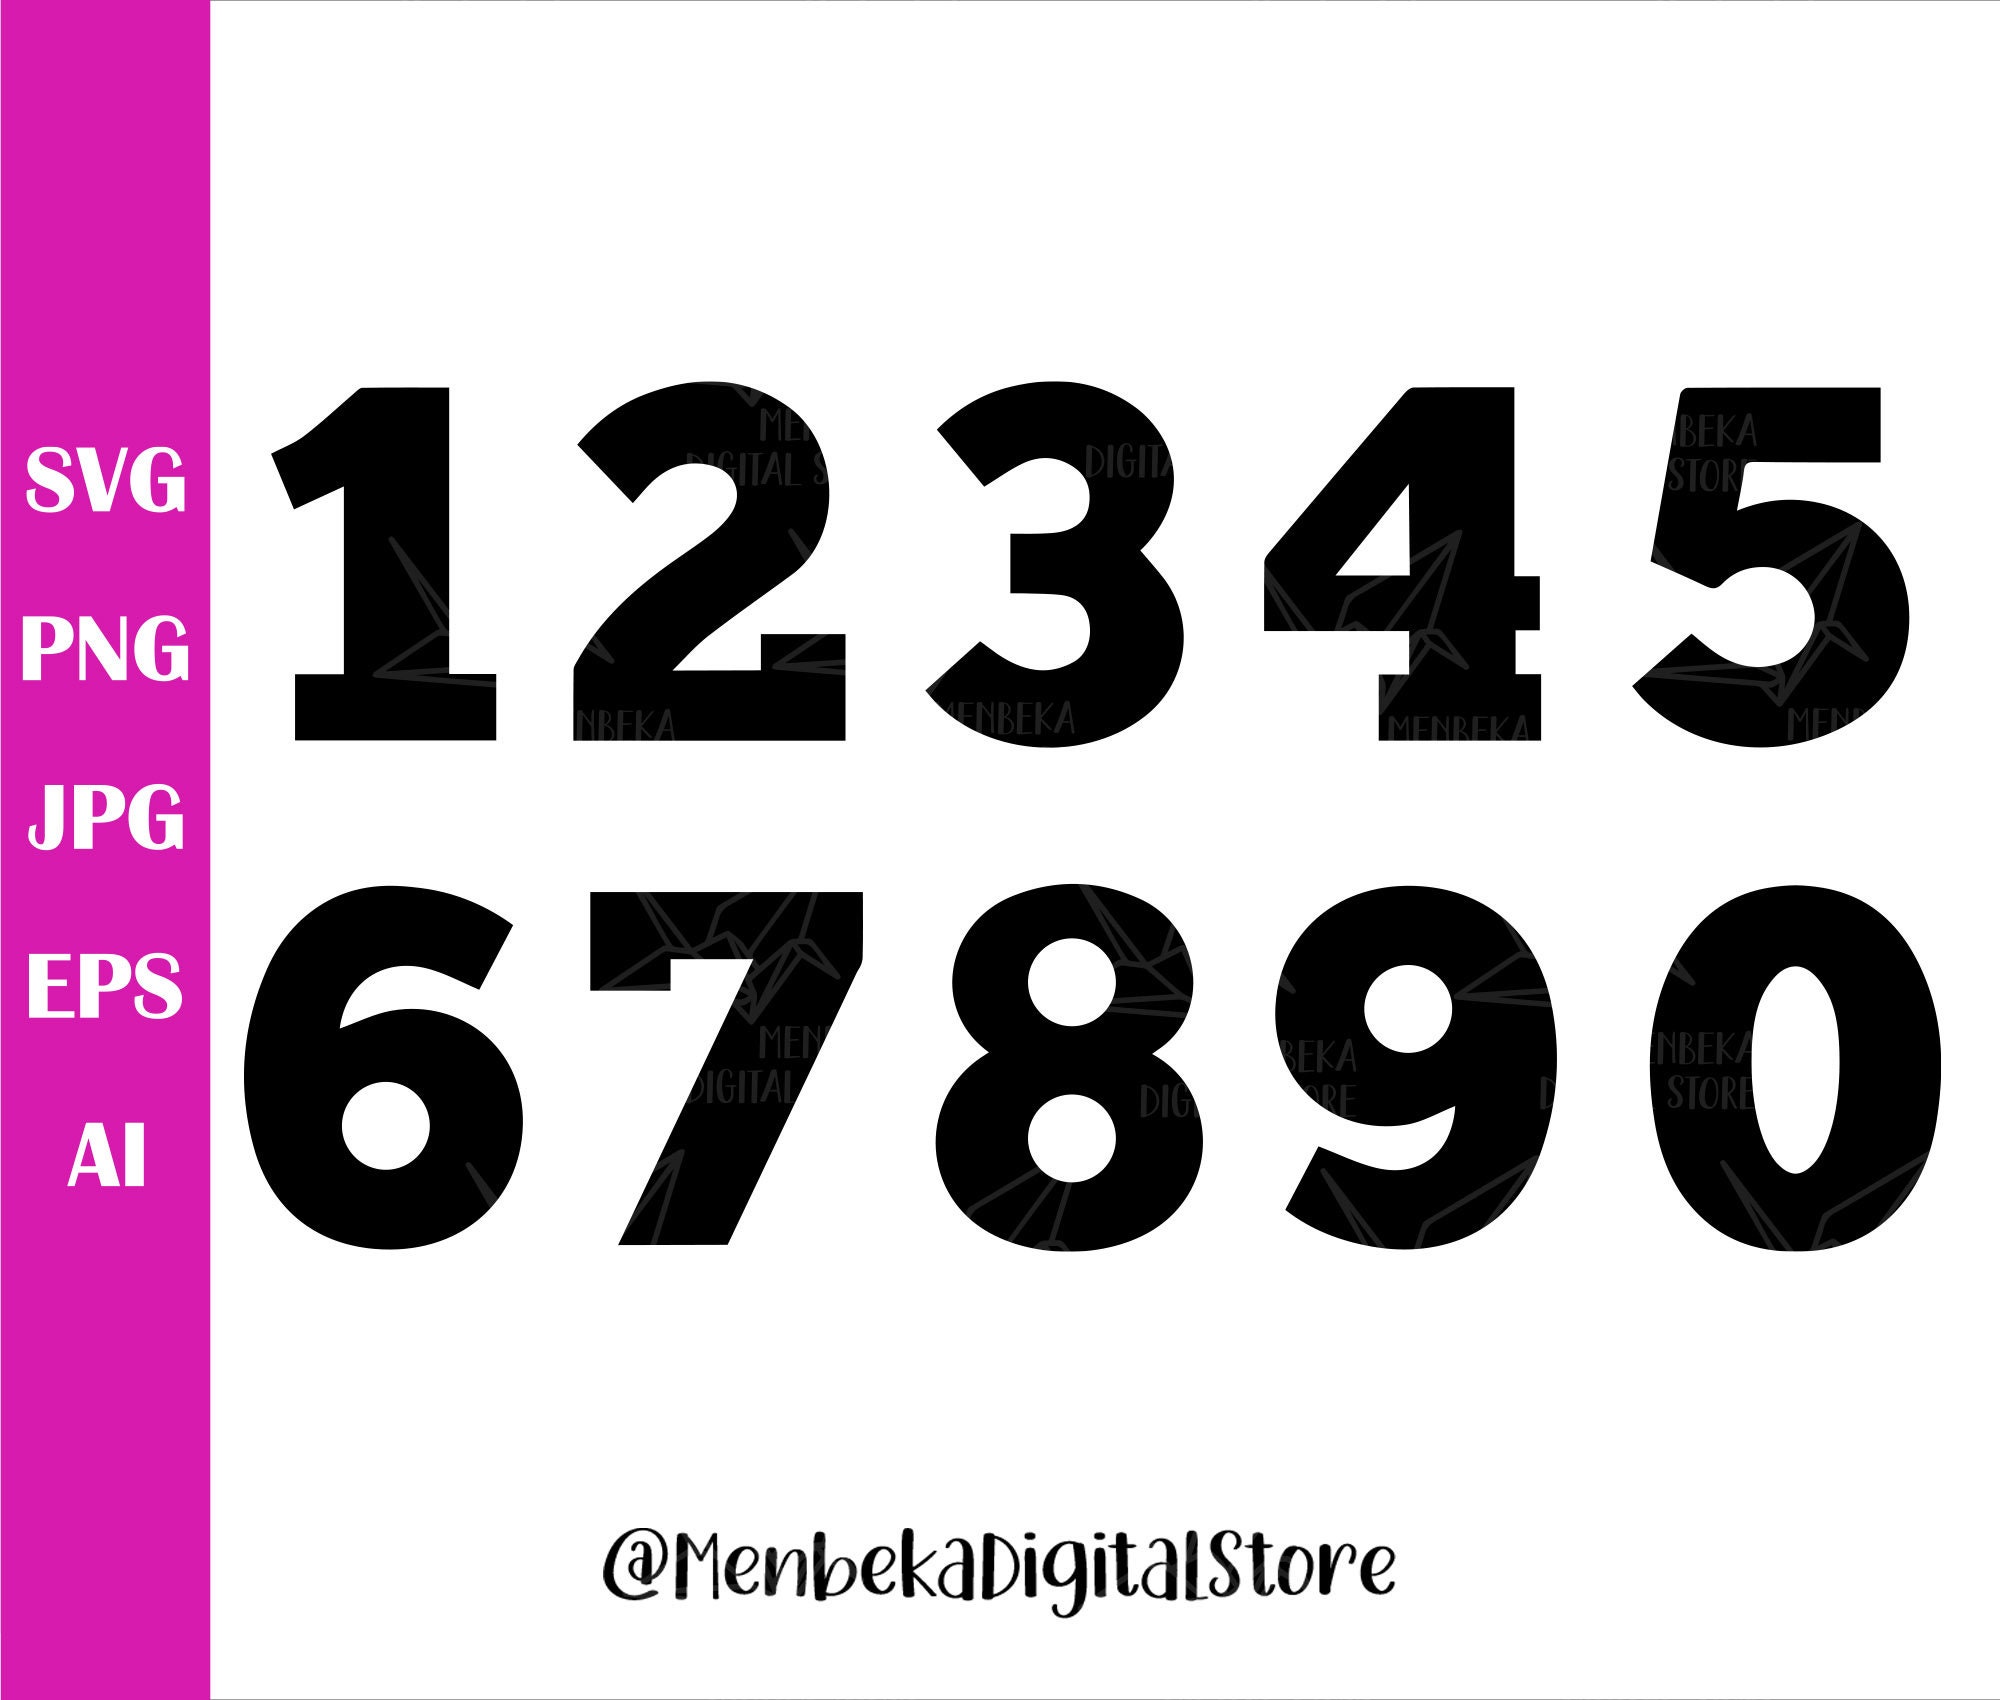 Premium Vector  Number set, hand drawn black numbers with white dotted  line, 1234567890. icons, vector